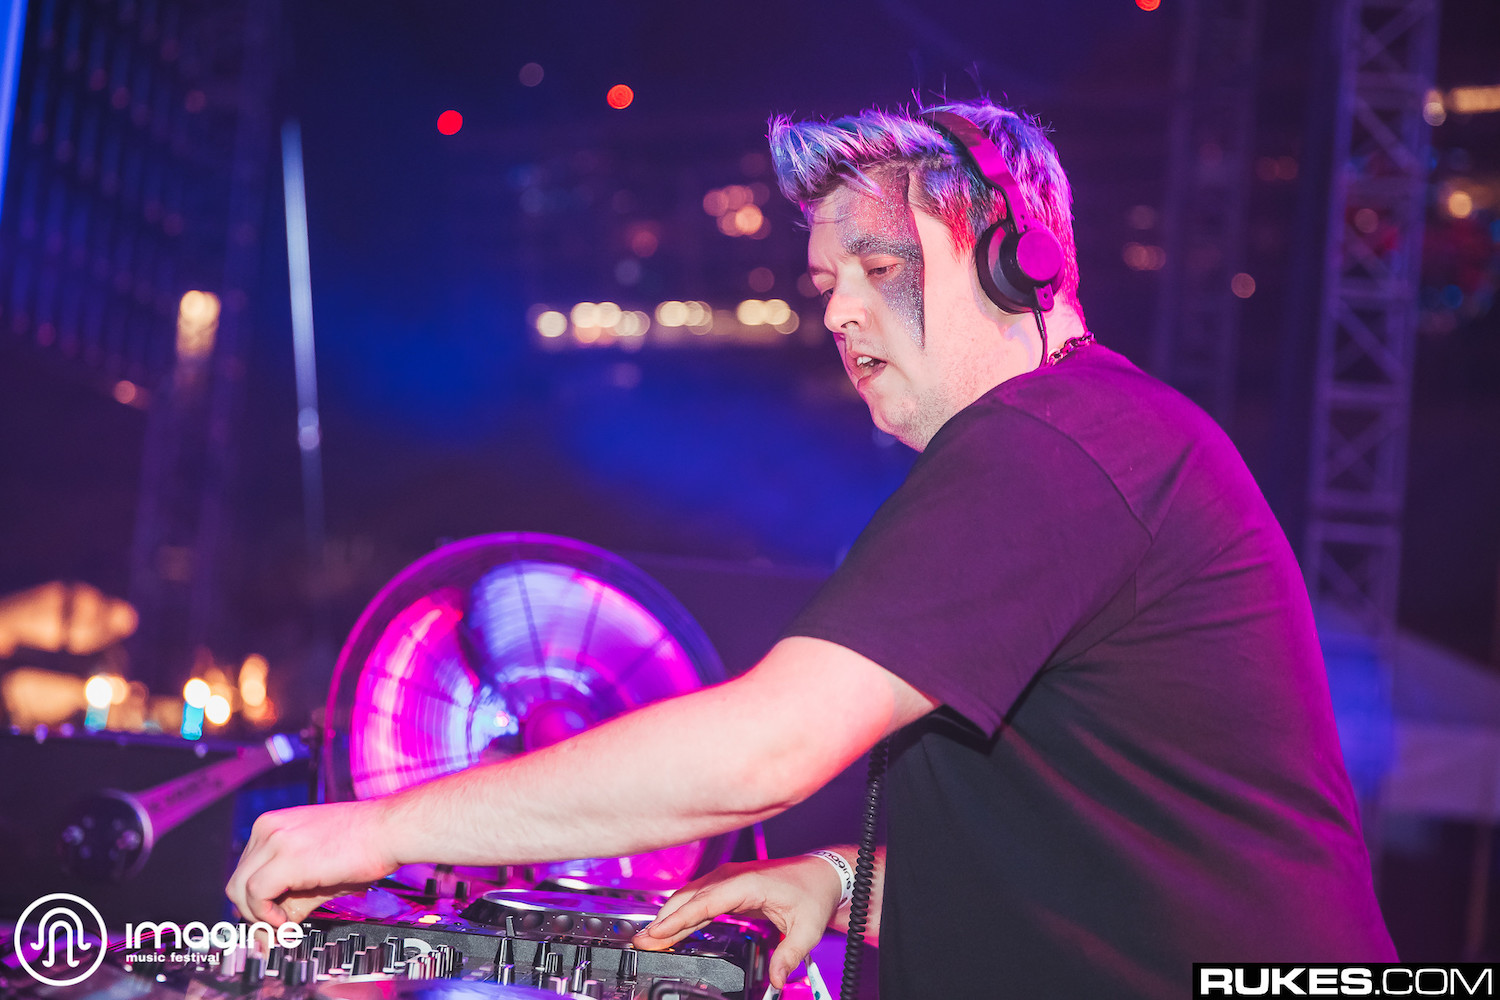 Flux Pavilion and Feed Me team up on inaugural collaboration, ‘Survive’